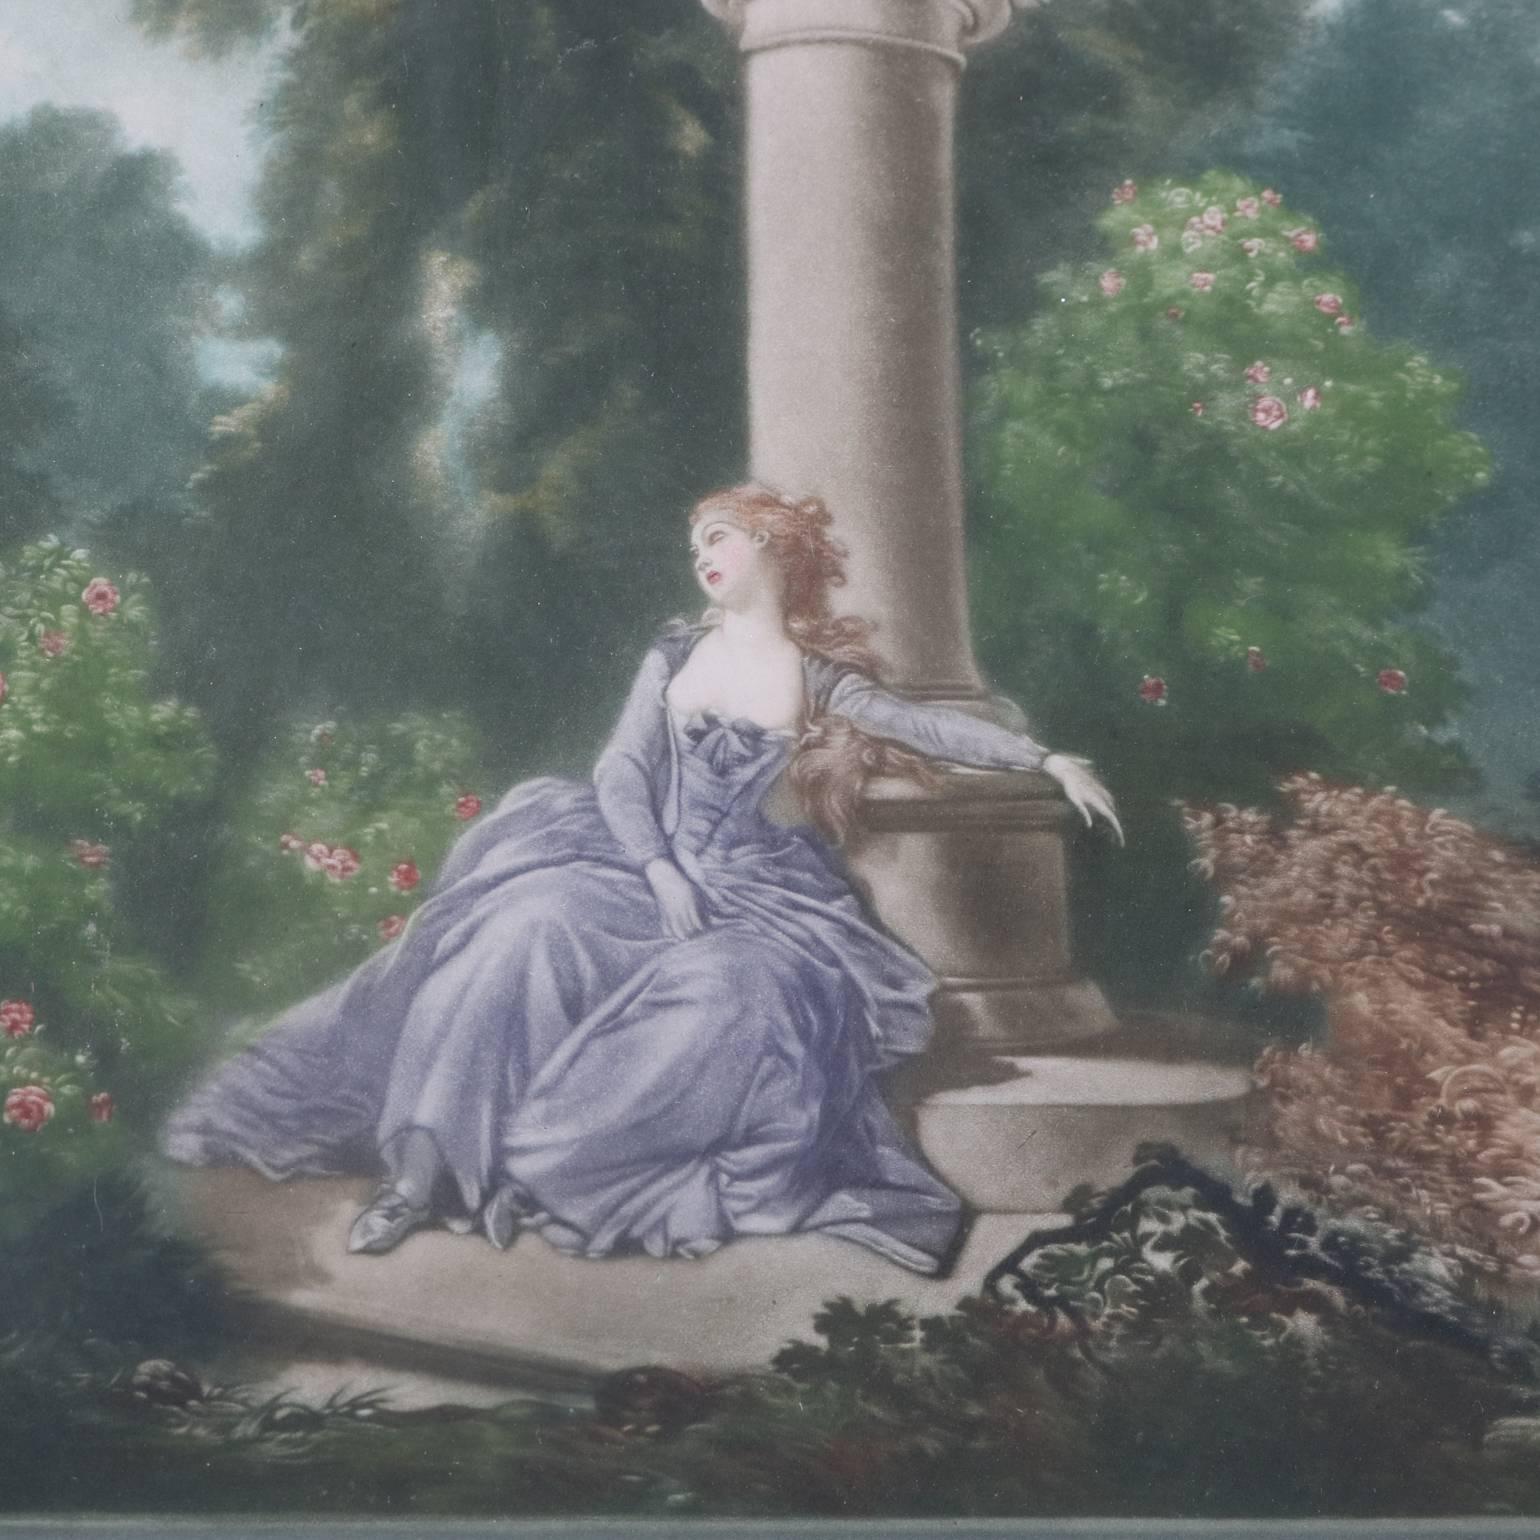 Antique print "L'Abandon" by Herbert Sedcole (British 1864-1920) depicts Victorian scene with lovers in the garden; housed in finely detailed gold gilt frame featuring bow tied ribbon crest and egg and dart surround; en verso original